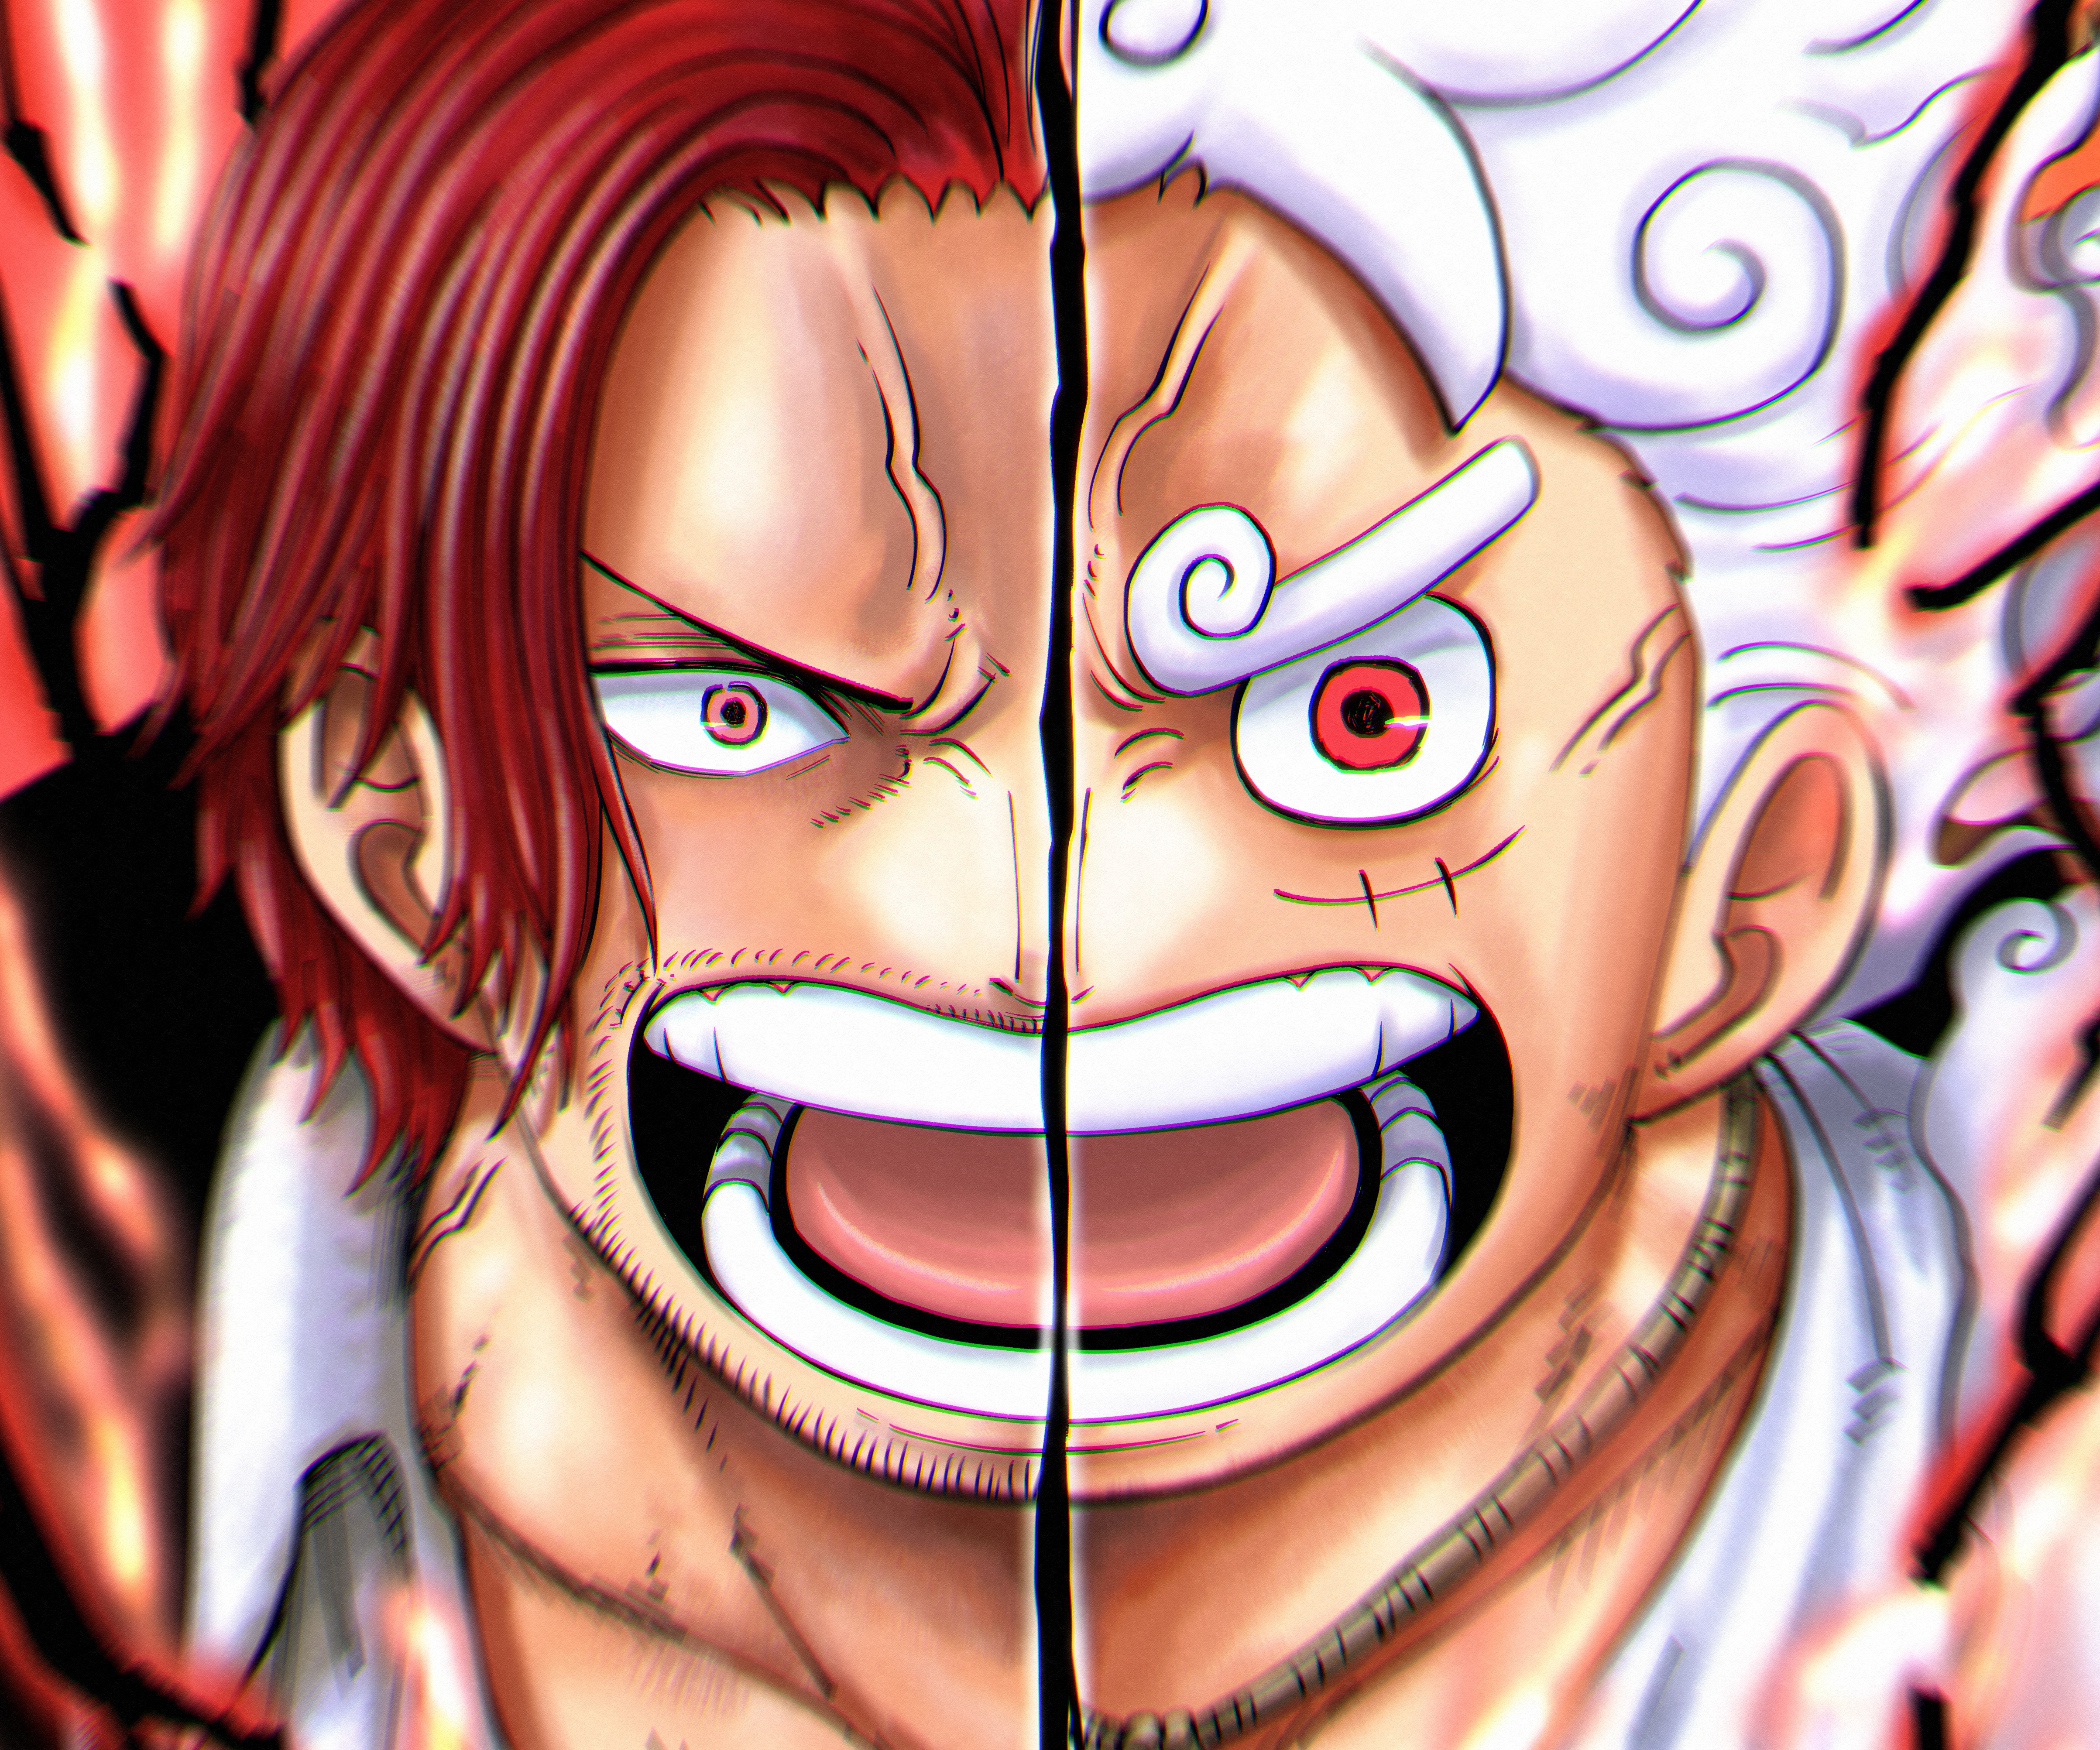 150+ Gear 5 (One Piece) HD Wallpapers and Backgrounds